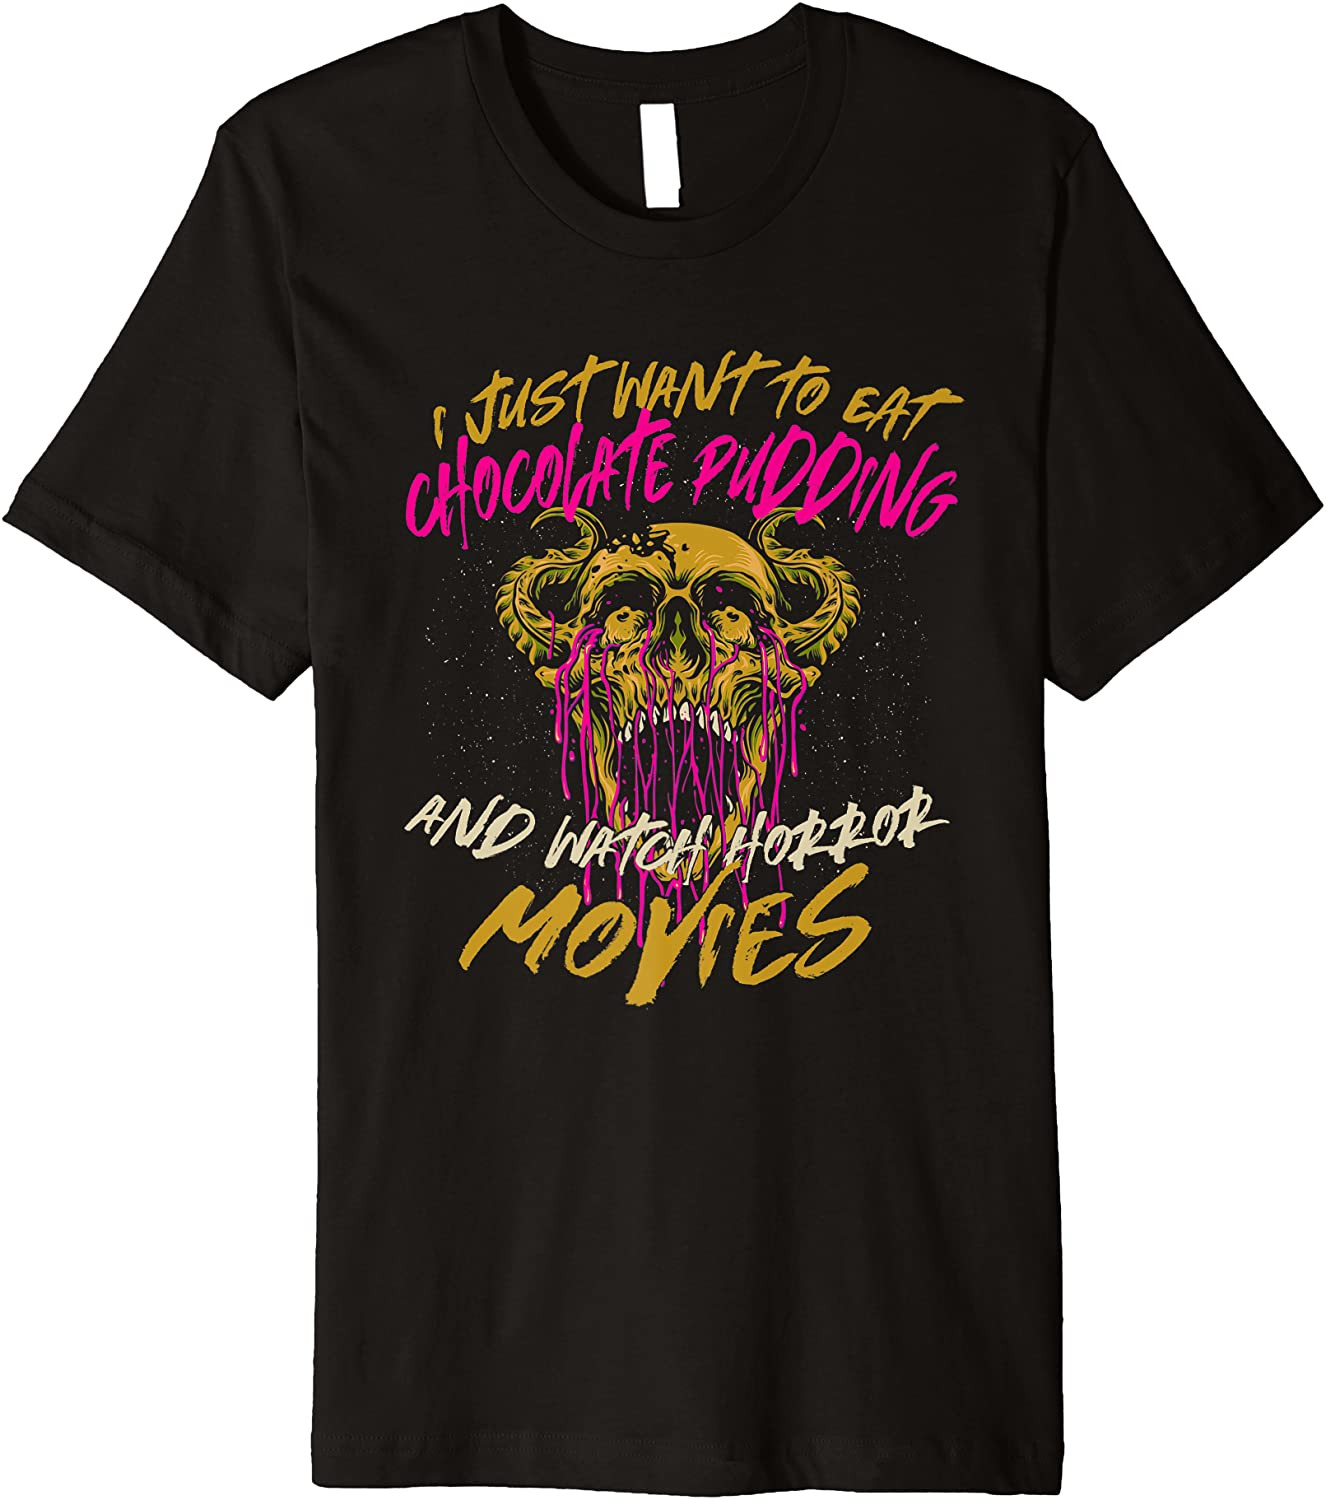 Eat Chocolate Pudding And Watch Horror Movies Comfort Food T-Shirt